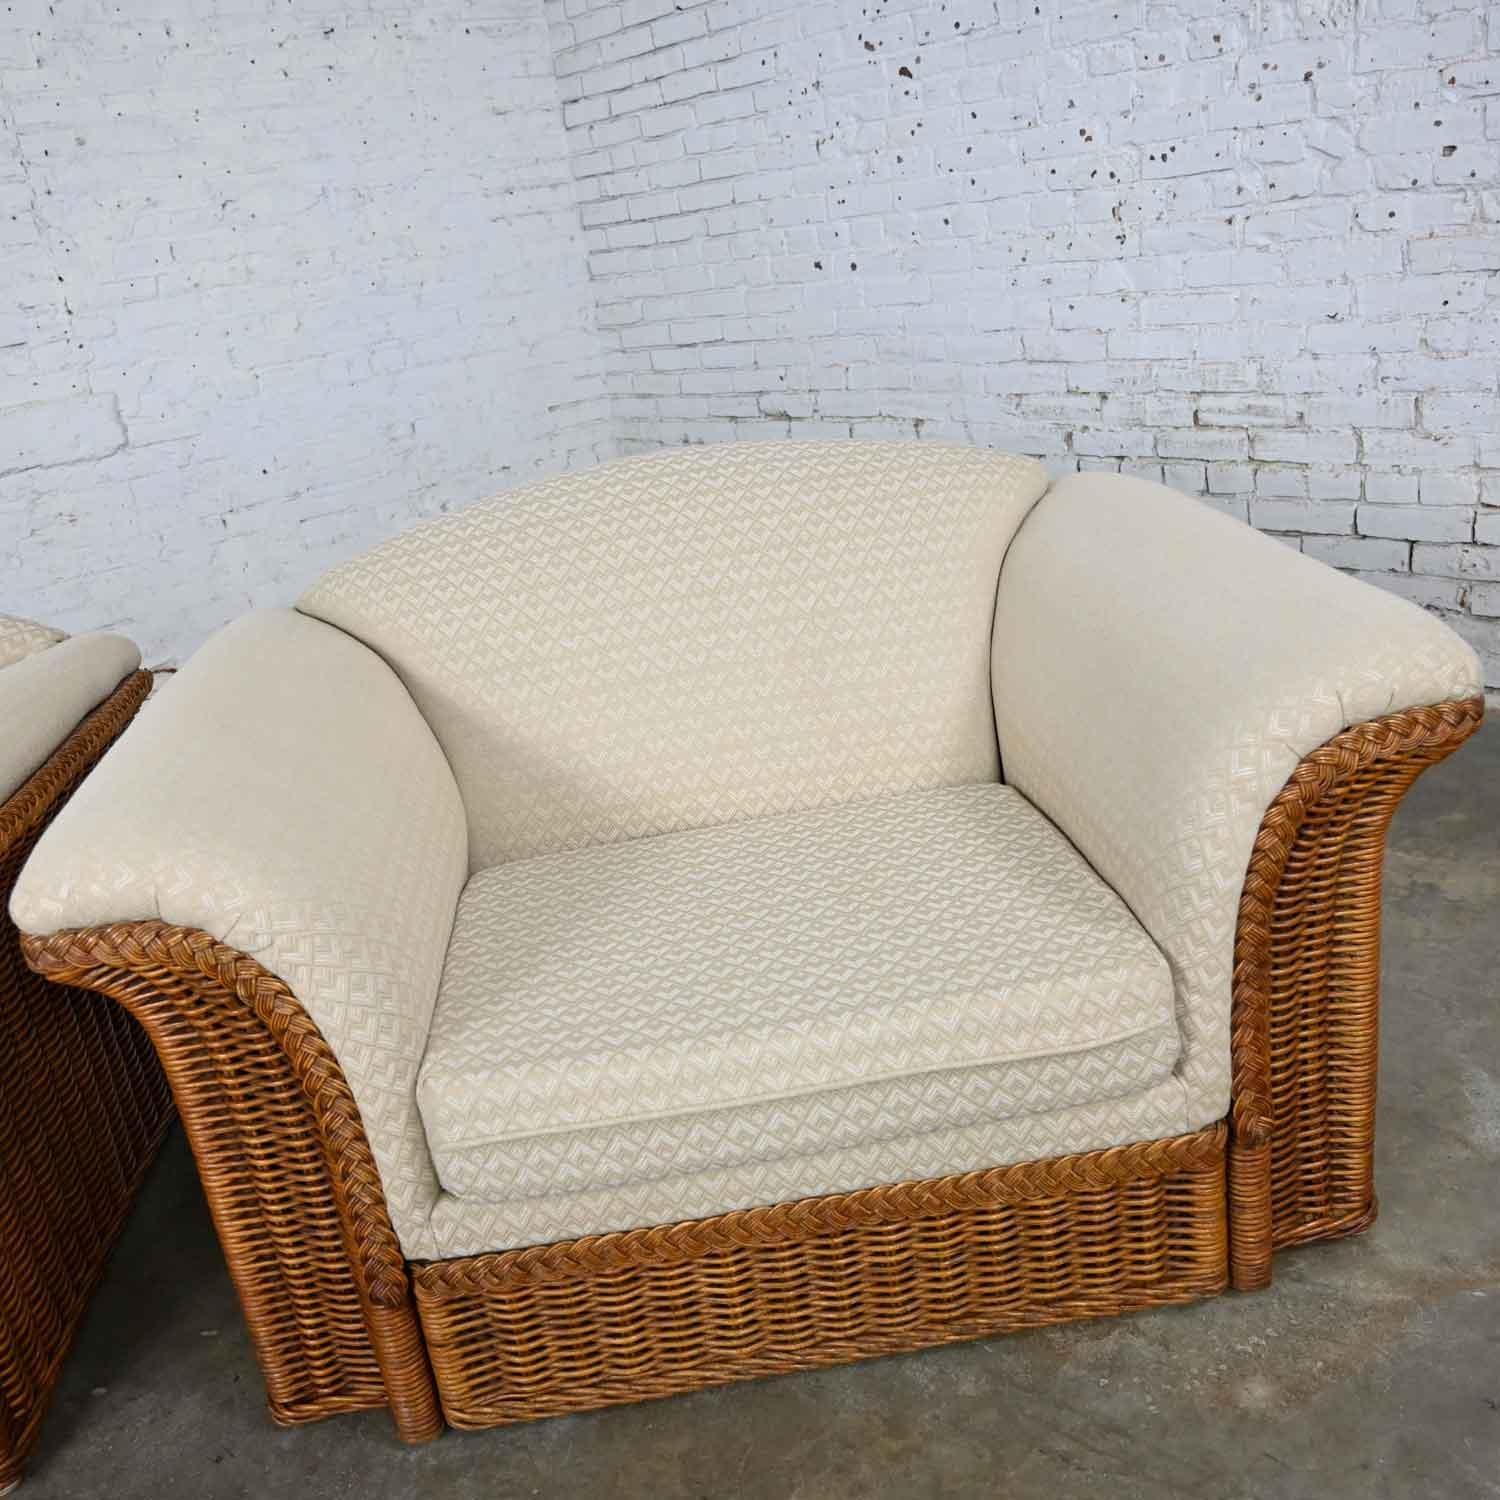 Rattan Wicker Pair of Oversized Lounge Chairs Manner of Michael Taylor For Sale 6